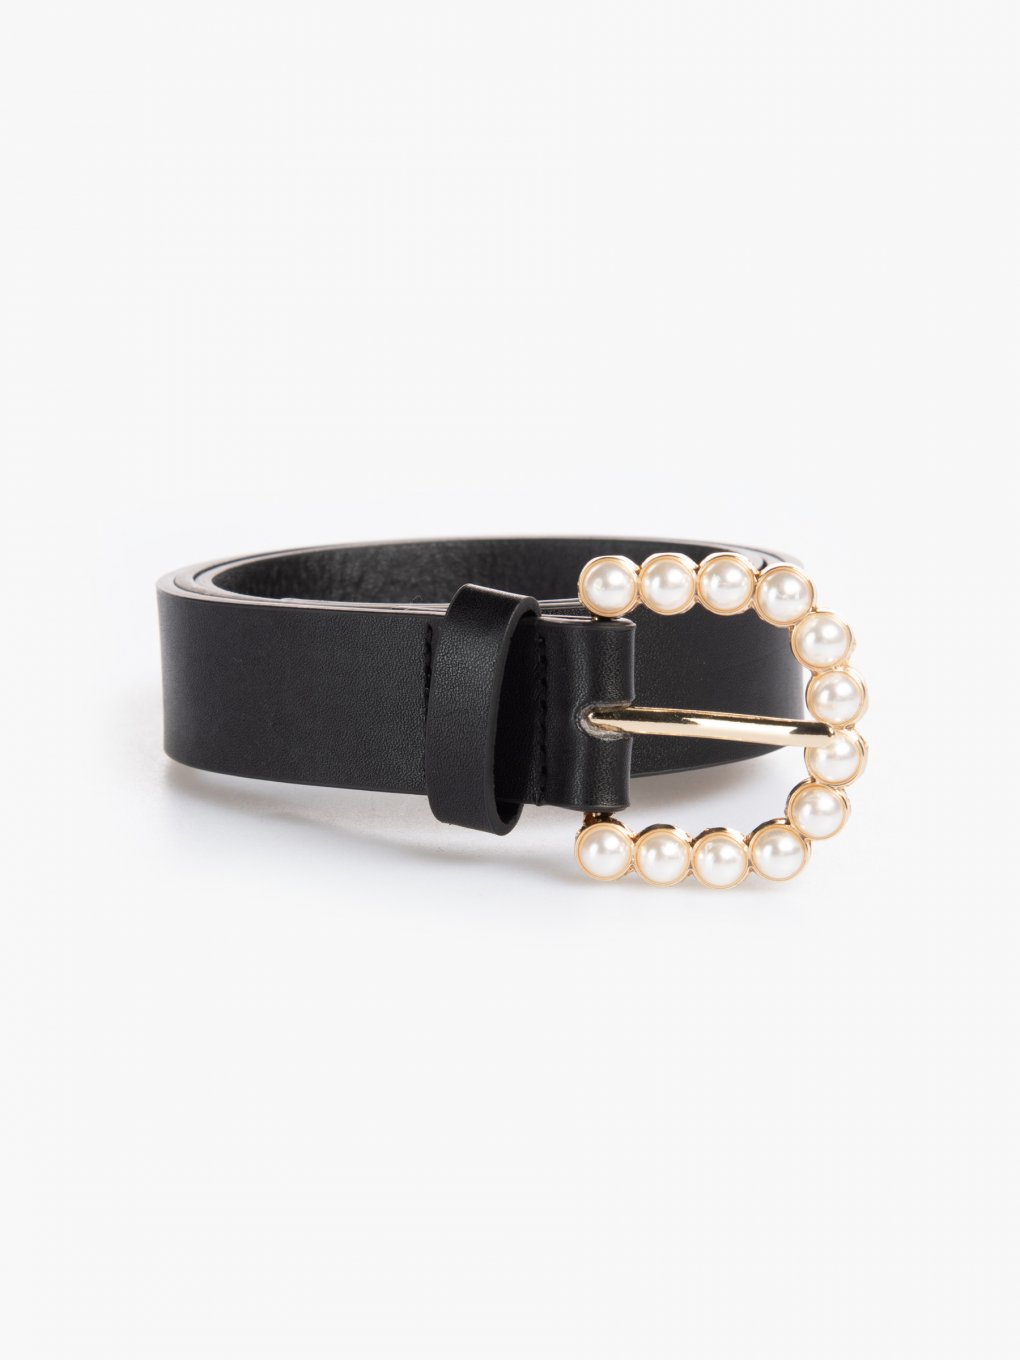 Faux leather belt with faux pearls